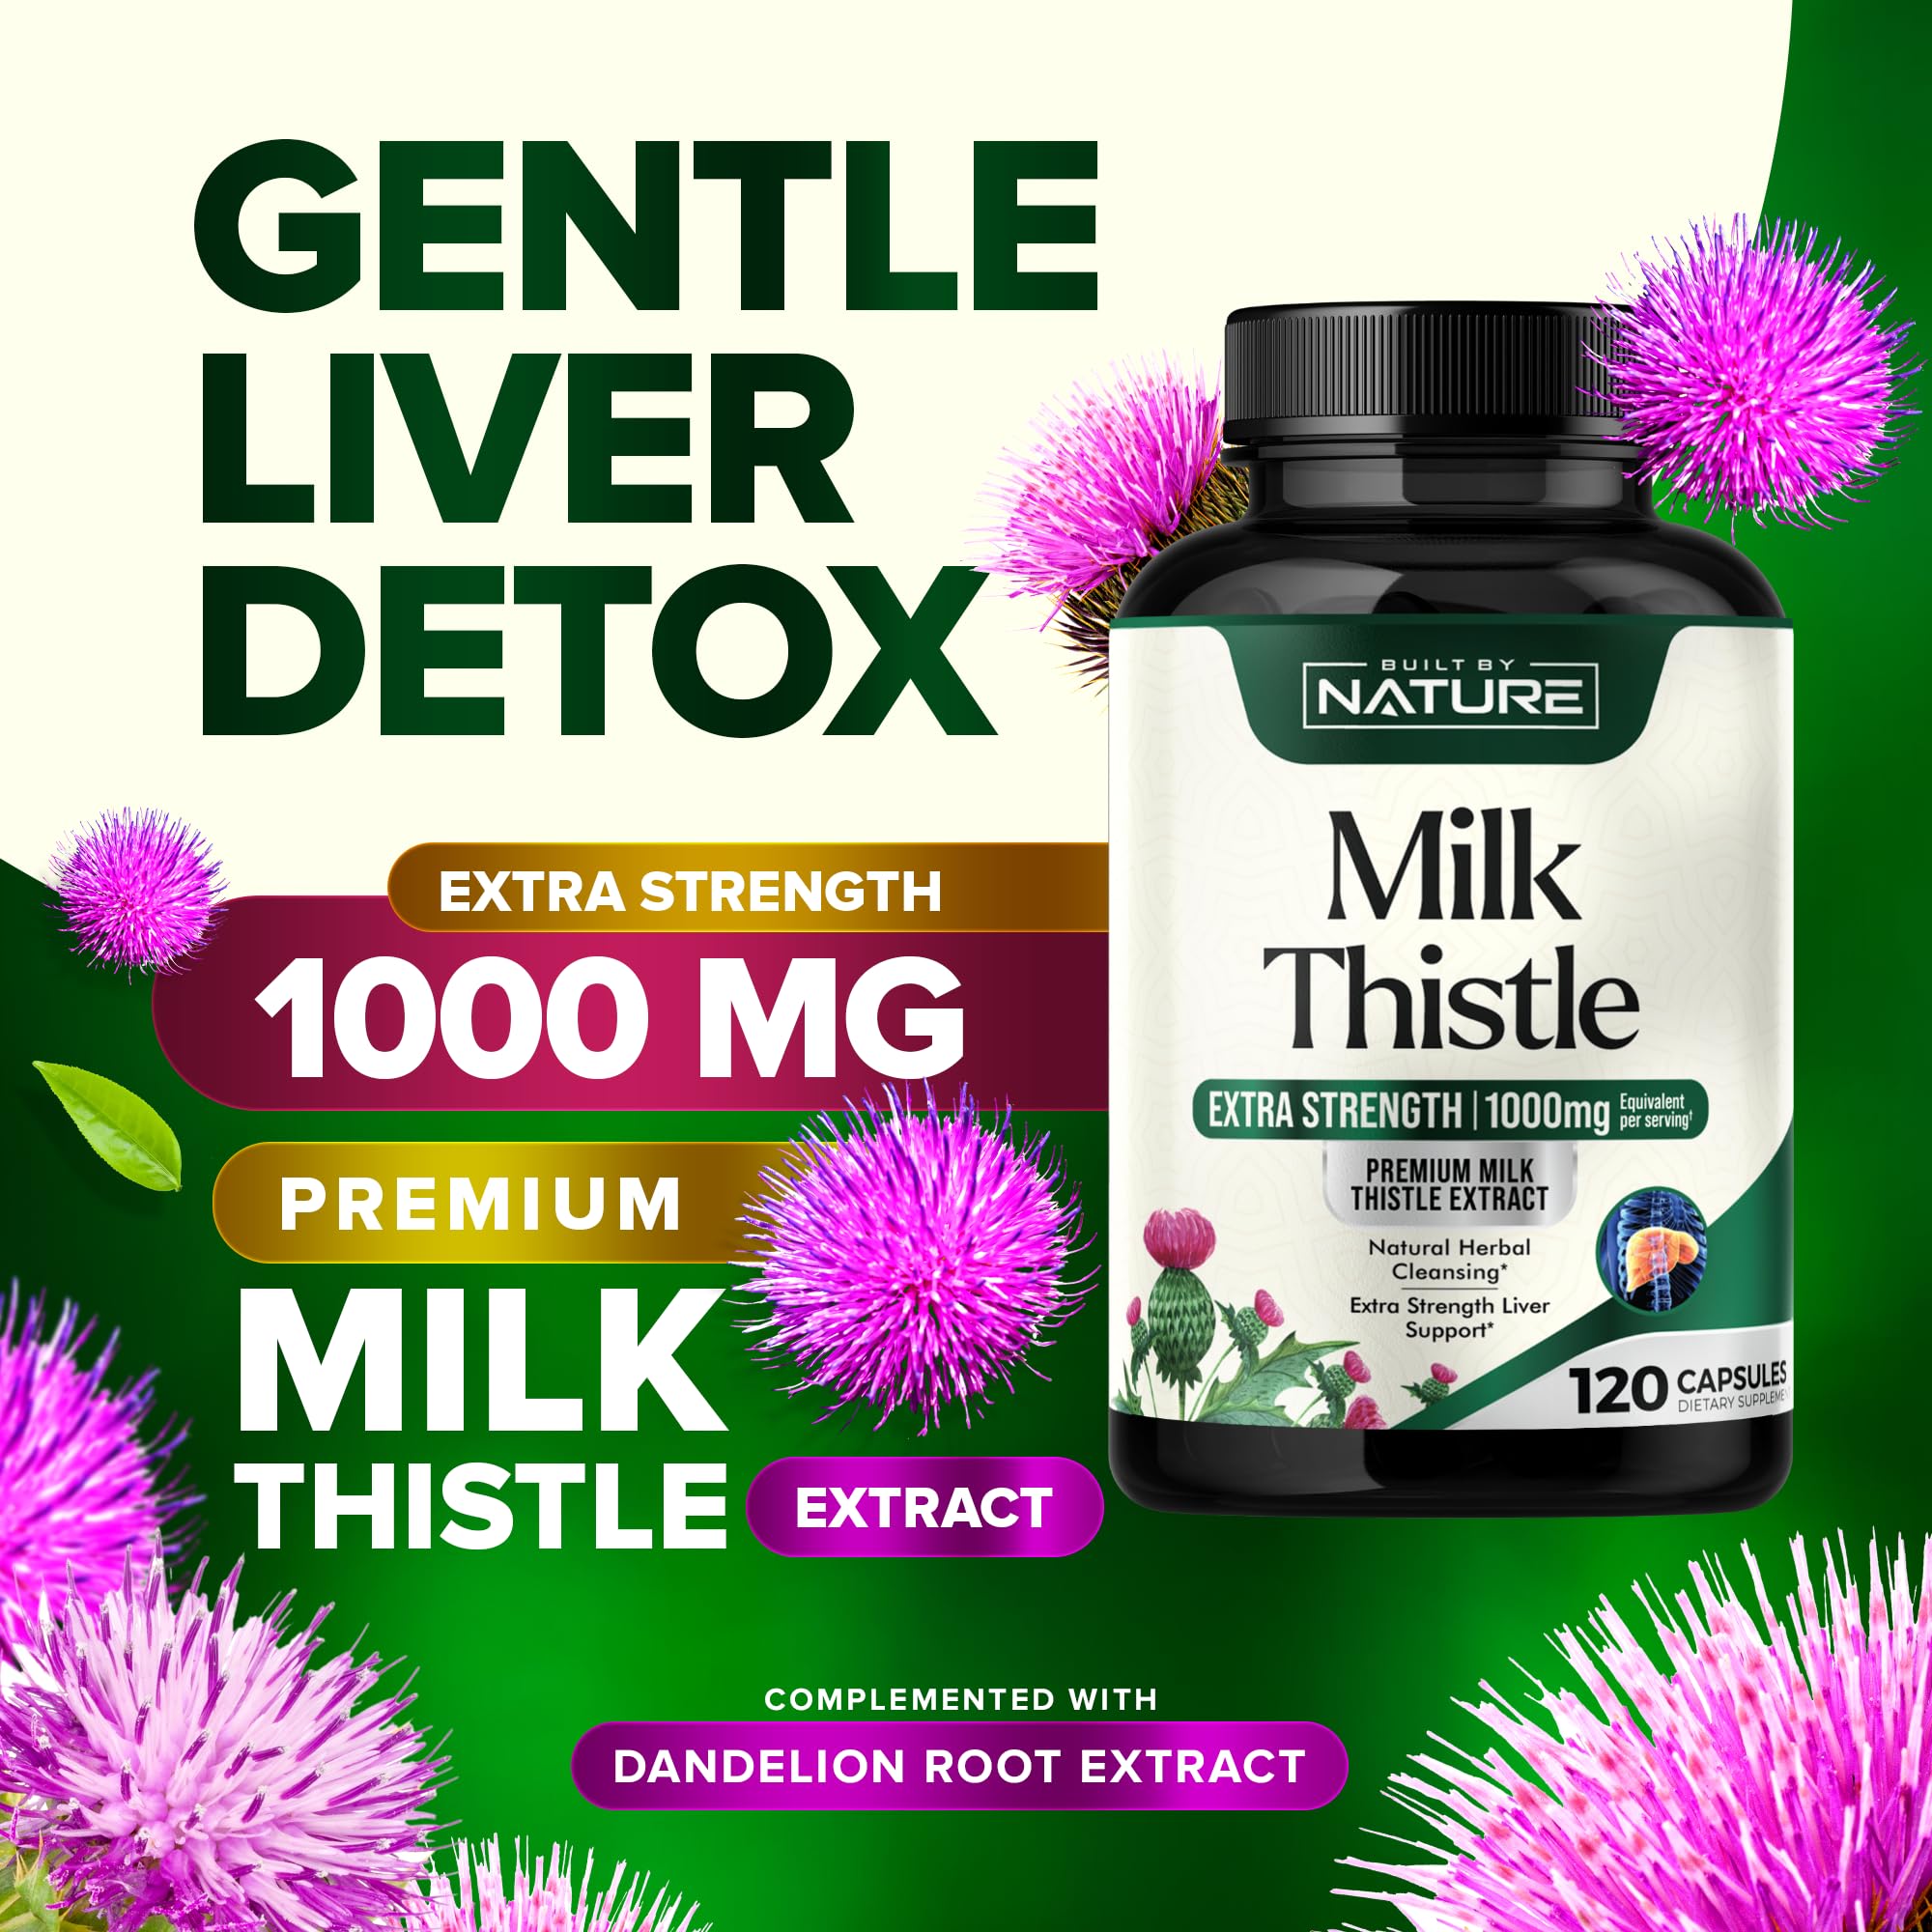 Built by Nature Milk Thistle 1000mg - Liver Detox Supplement with Silymarin Extract & Dandelion Root – Gentle Herbal Liver Cleanse for Men & Women - Liver Health Support - Non-GMO